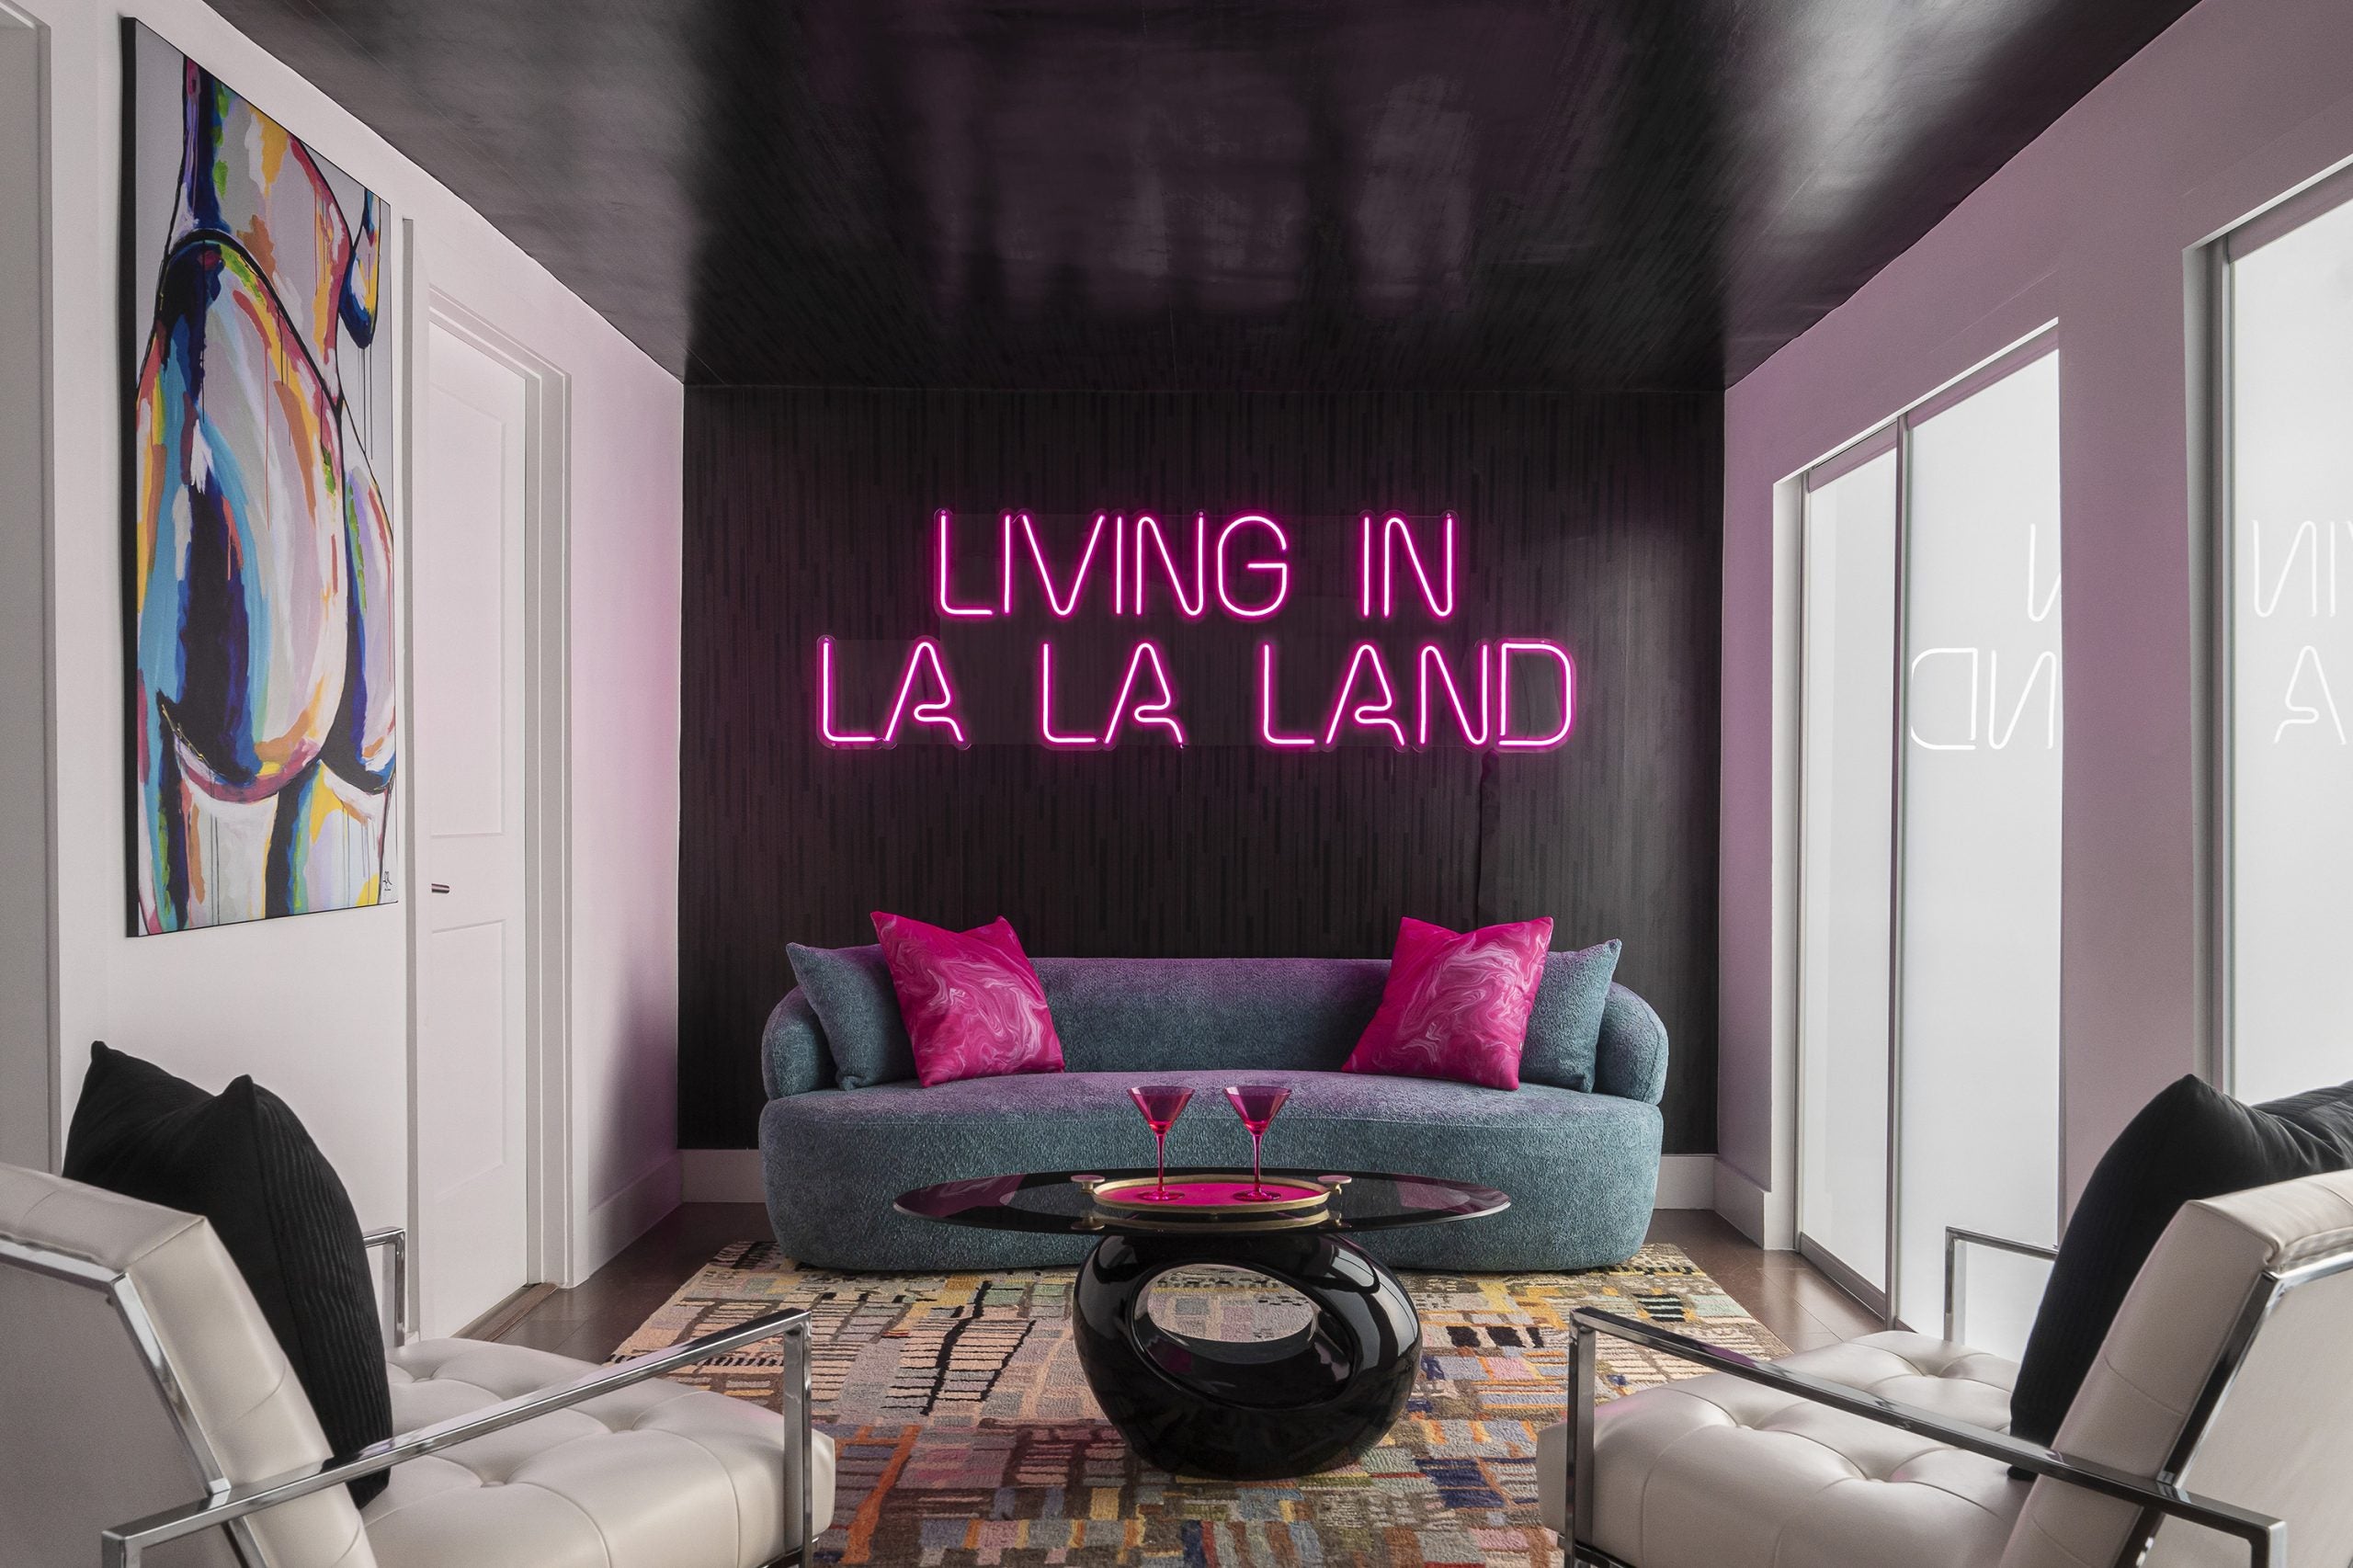 Living In La la Land: Inside The Colorful Fort Lauderdale Airbnb Property Inspired By La La Anthony